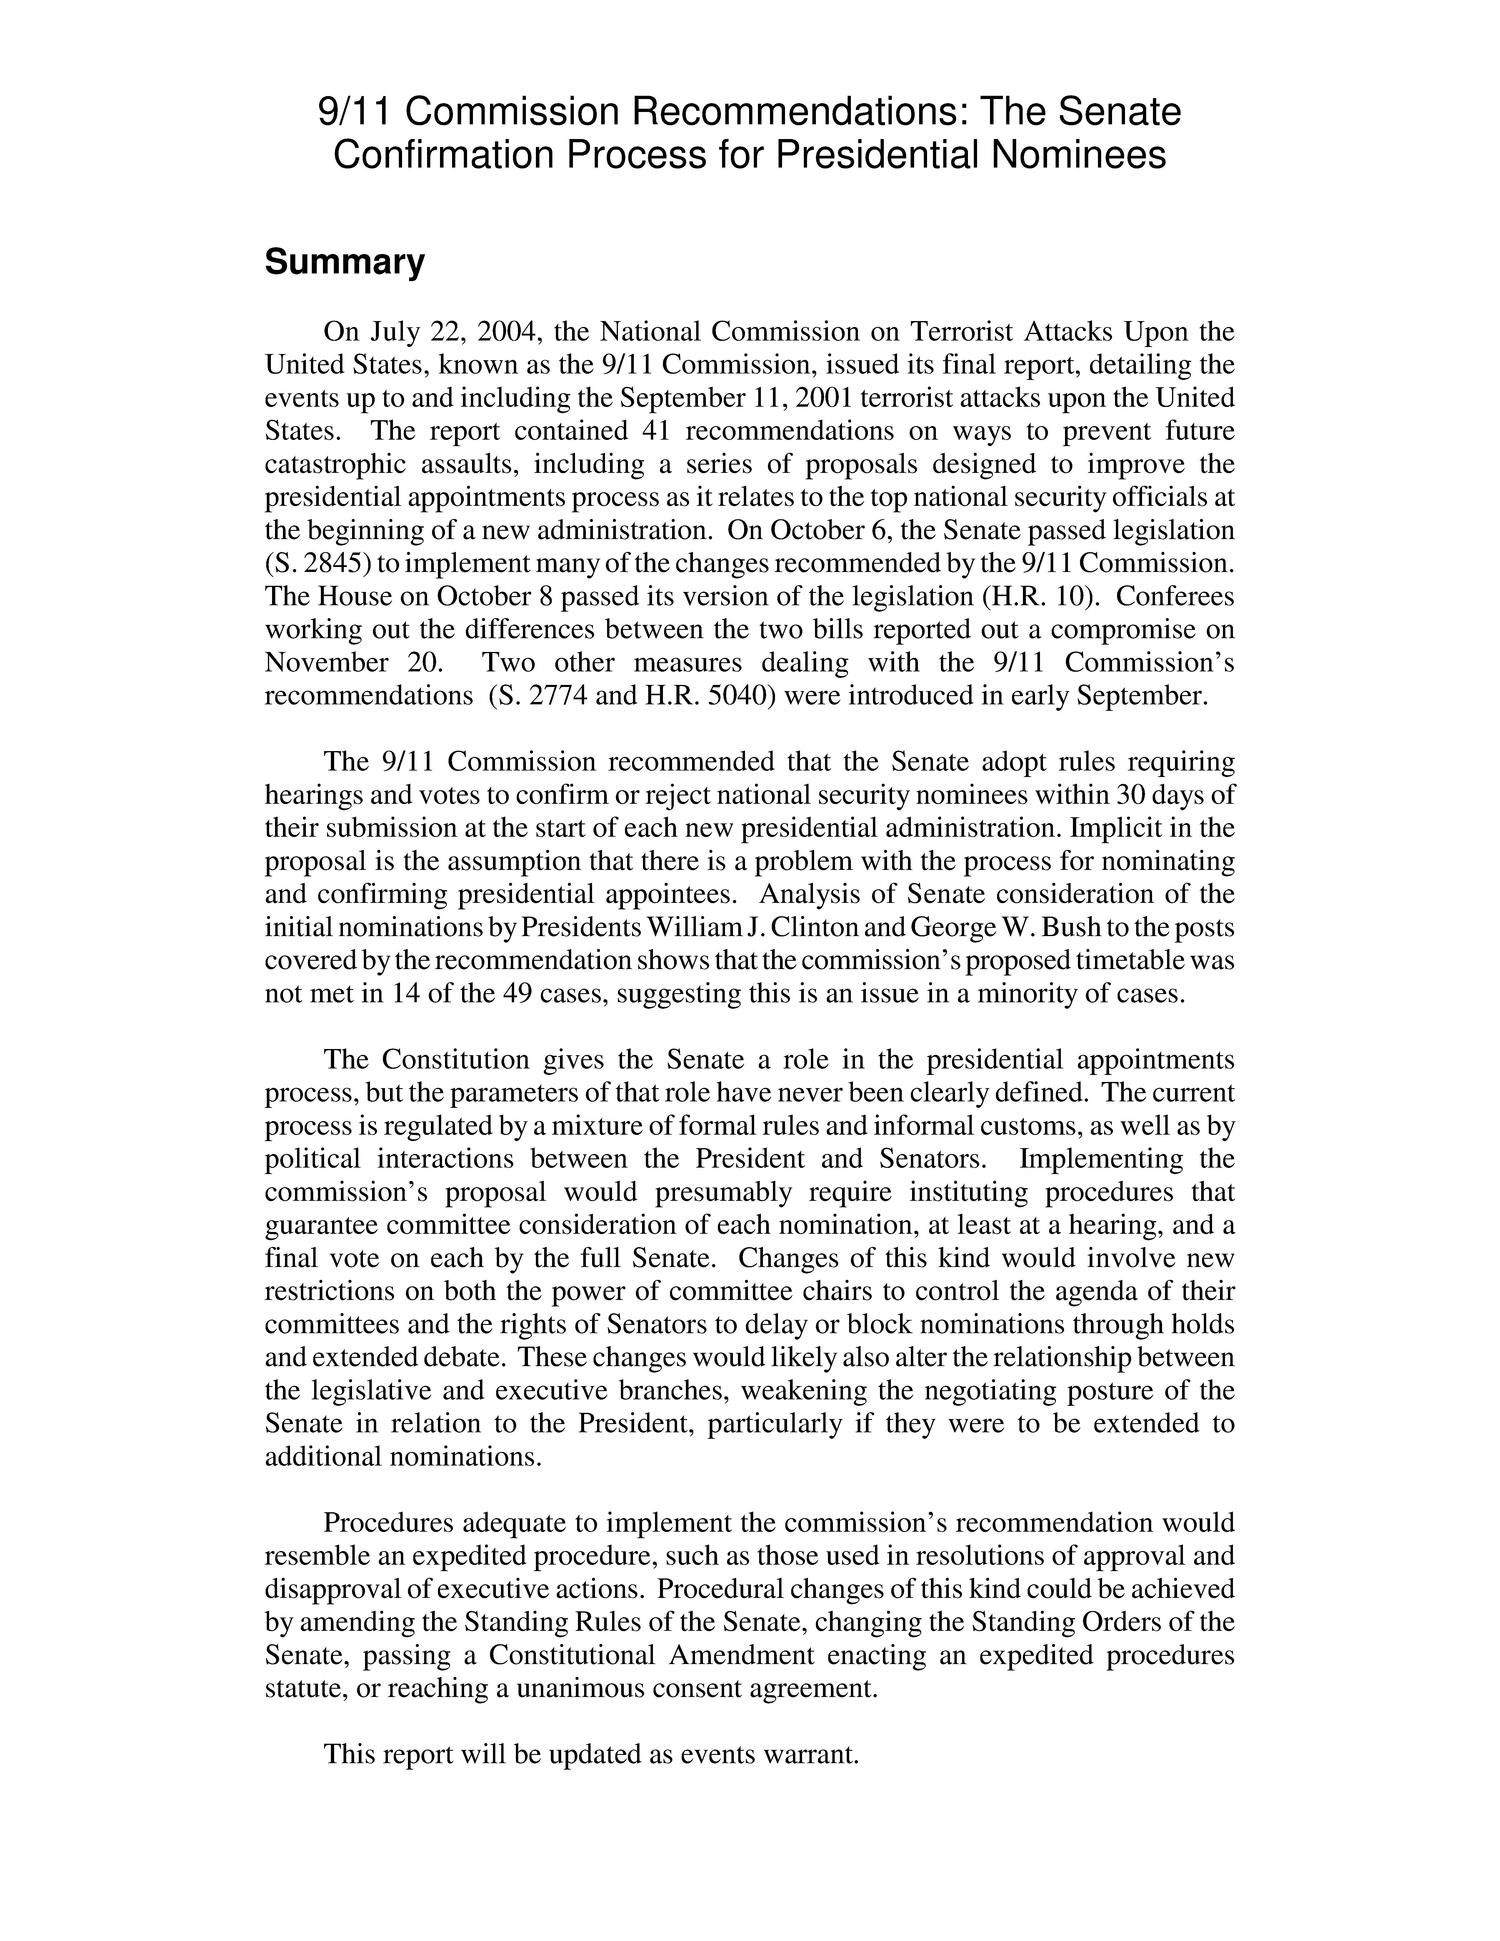 9/11 Commission Recommendations: The Senate Confirmation Process for Presidential Nominees
                                                
                                                    [Sequence #]: 2 of 31
                                                